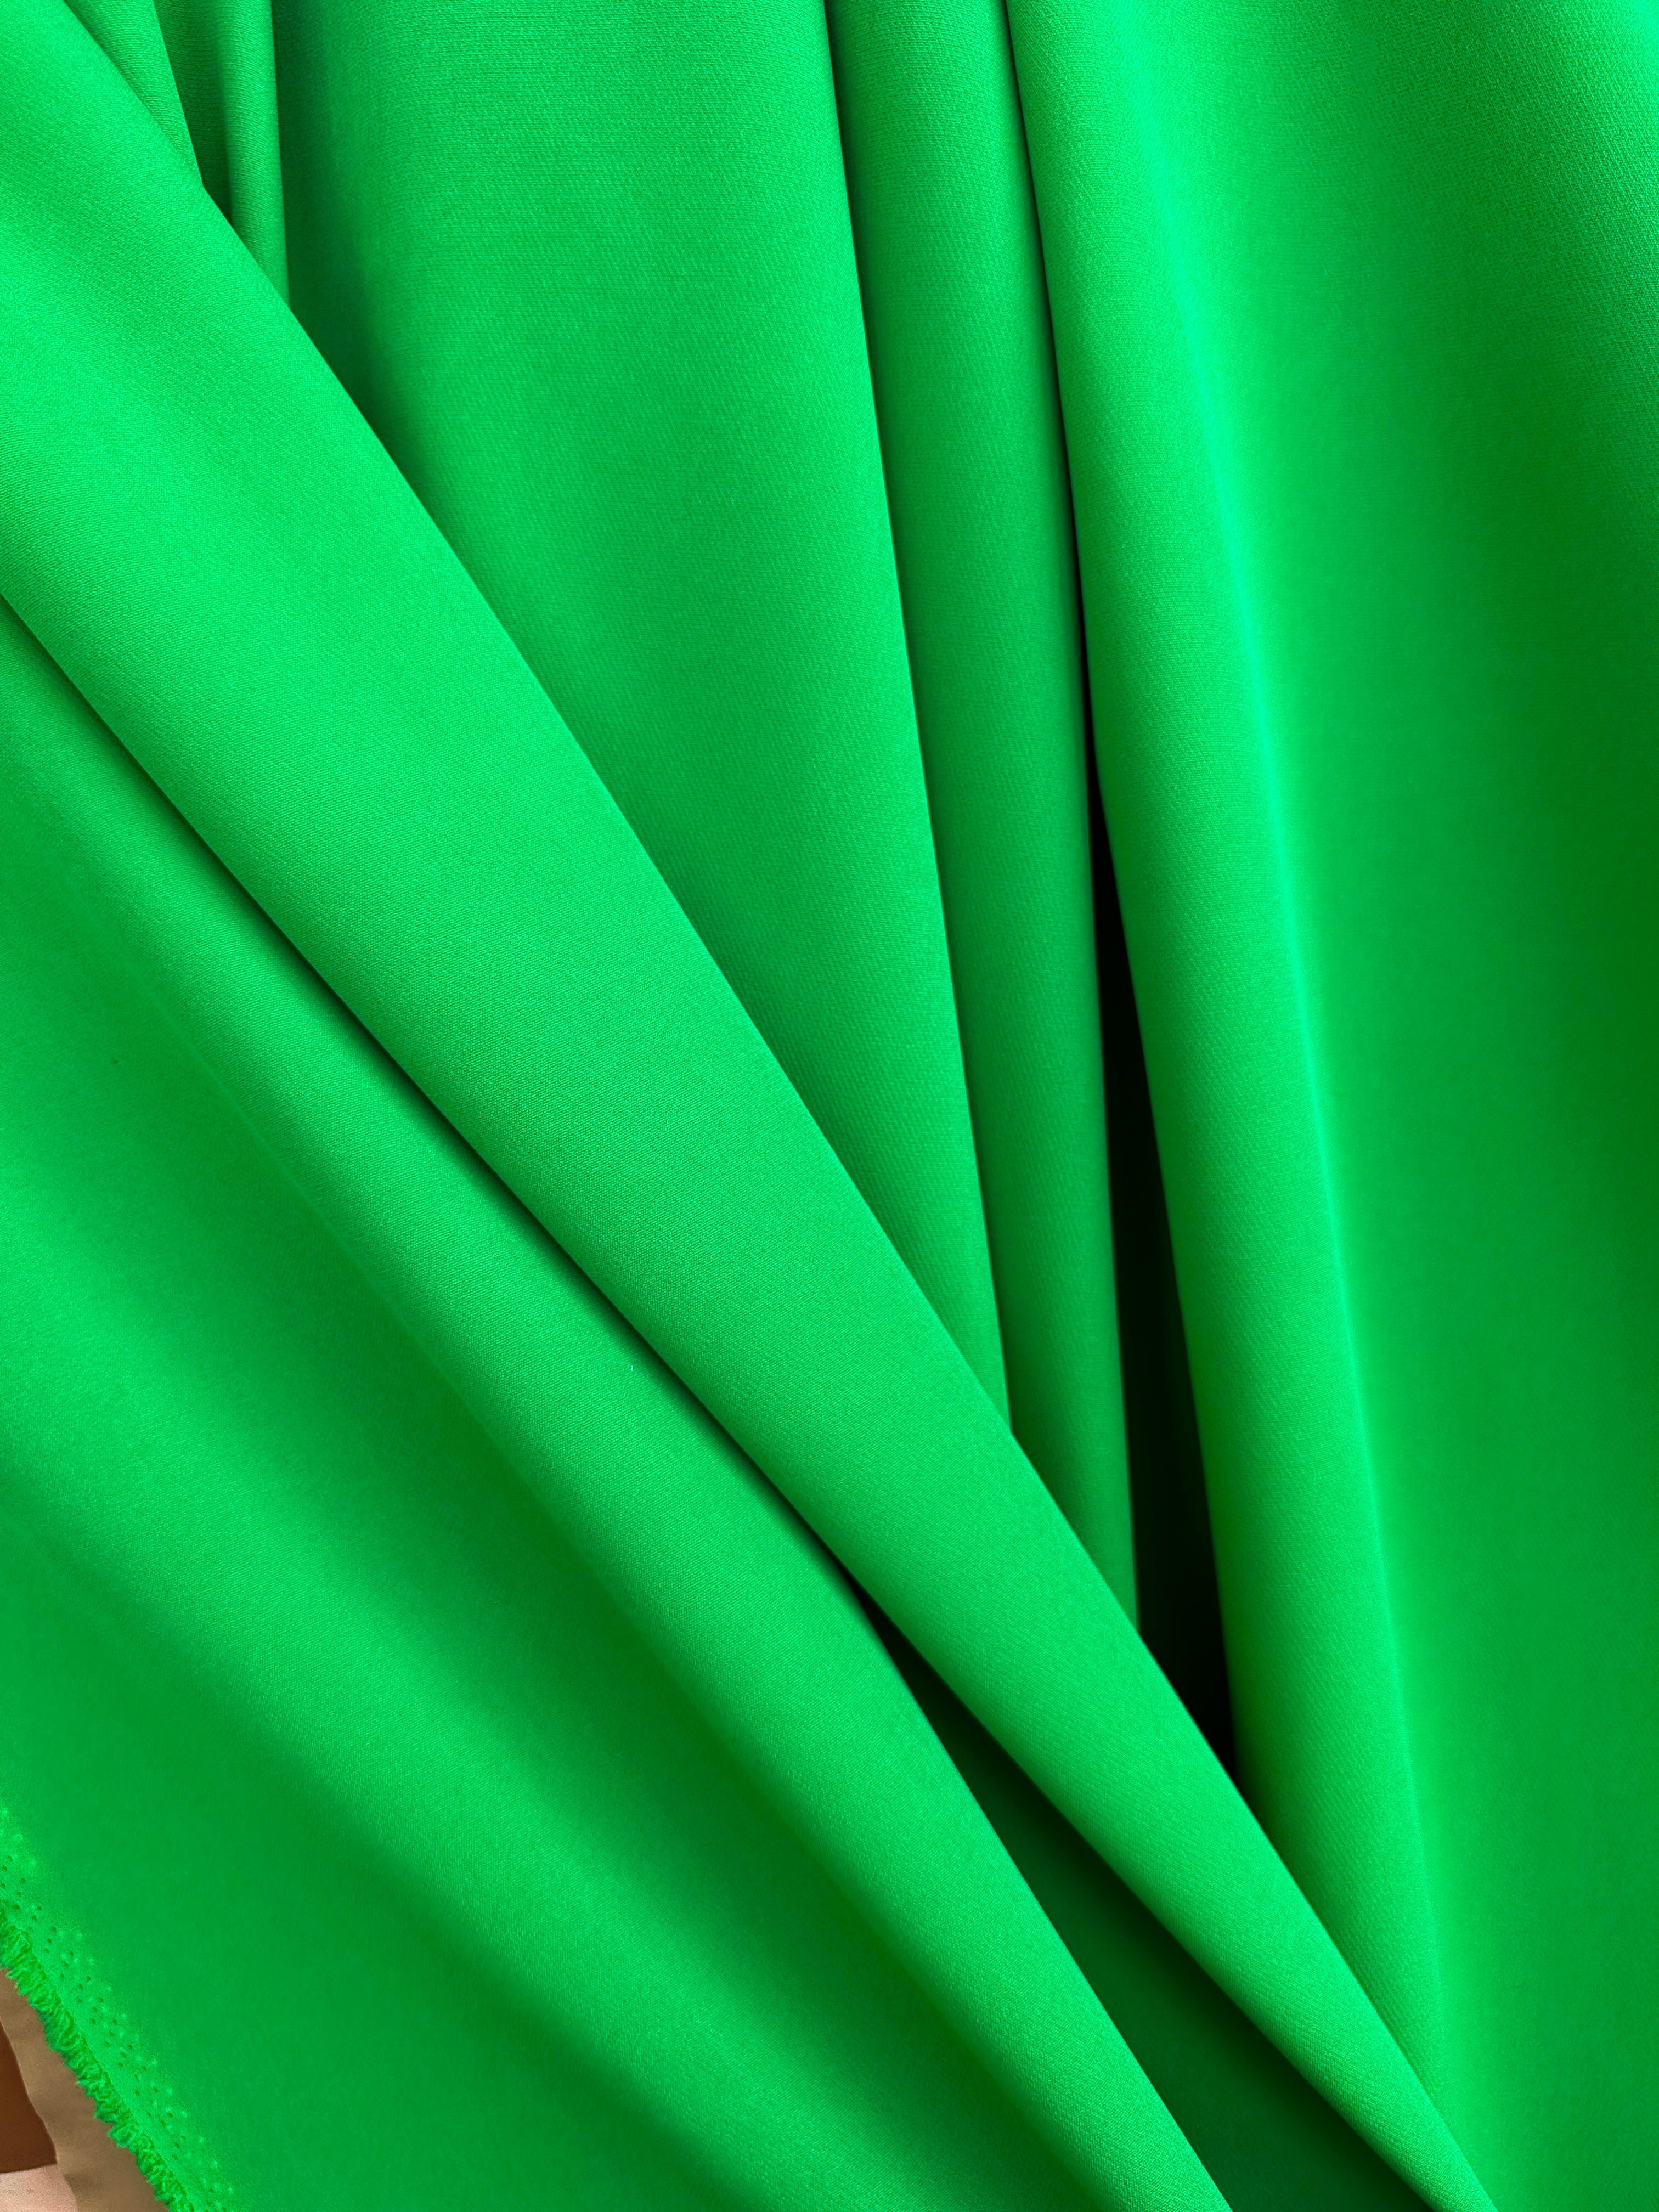 stretch crepe, brushed twill, brushed crepe, poly gabardine, polyester gabardine, gabardine material, poplin gabardine, poly poplin, polyester, poplin twill, poplin fabric, green stretch crepe, olive green crepe, dark green fabric, fabric on sale, discounted fabric, bridal fabric crepe. green bridal fabric, 4 way stretch, fabric on demand